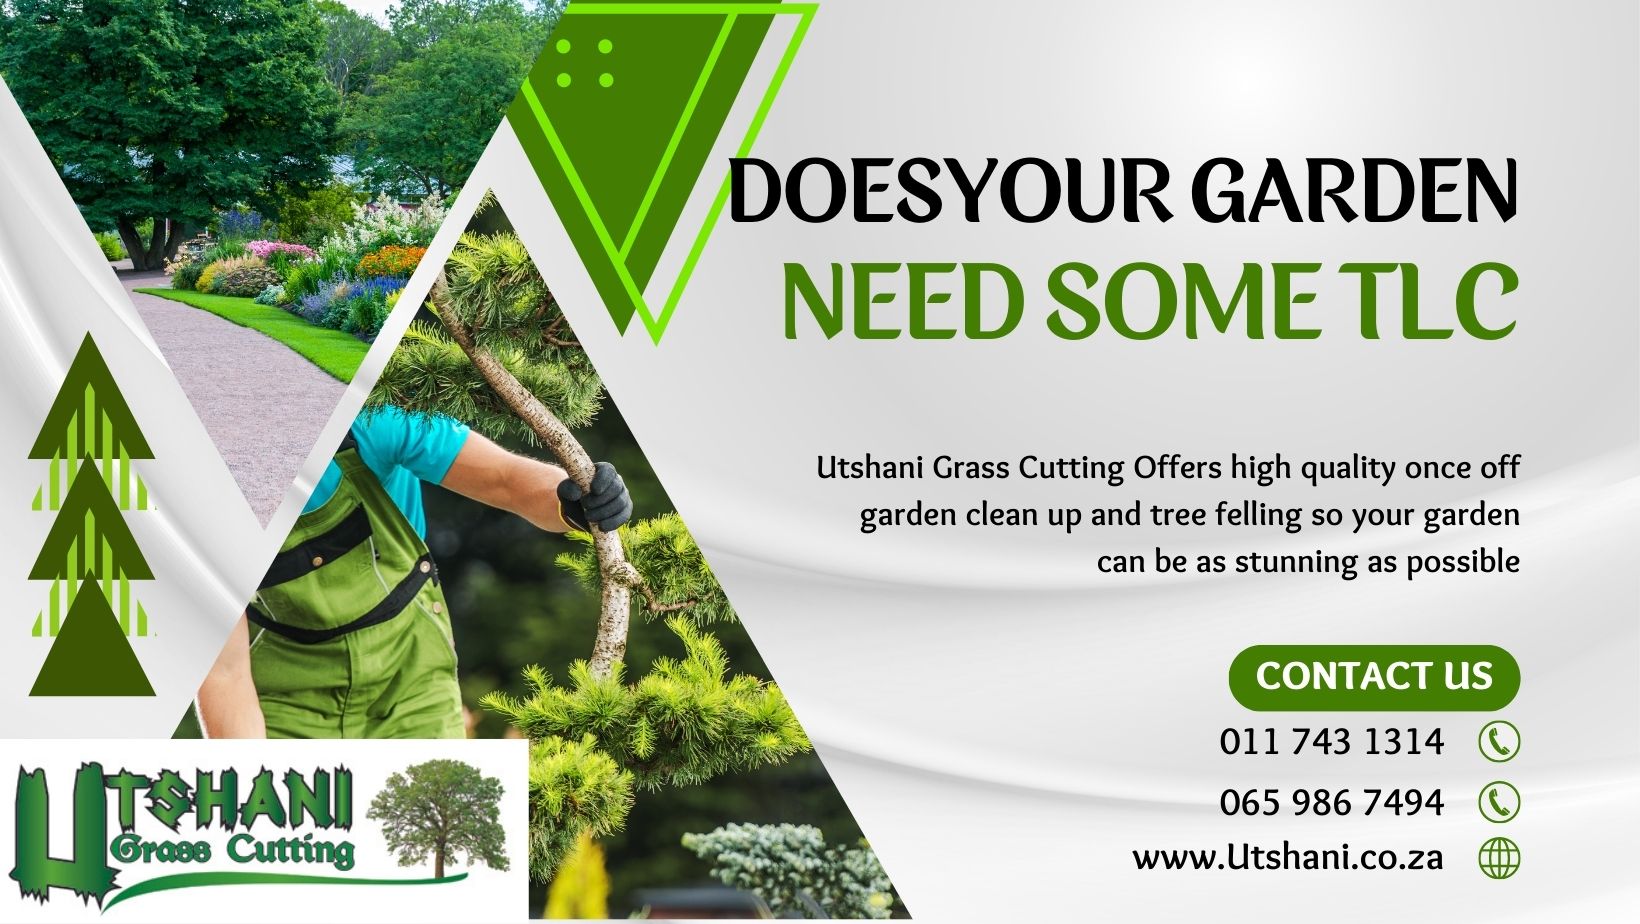 Utshani Grass Cutting_Does your garden need some tlc